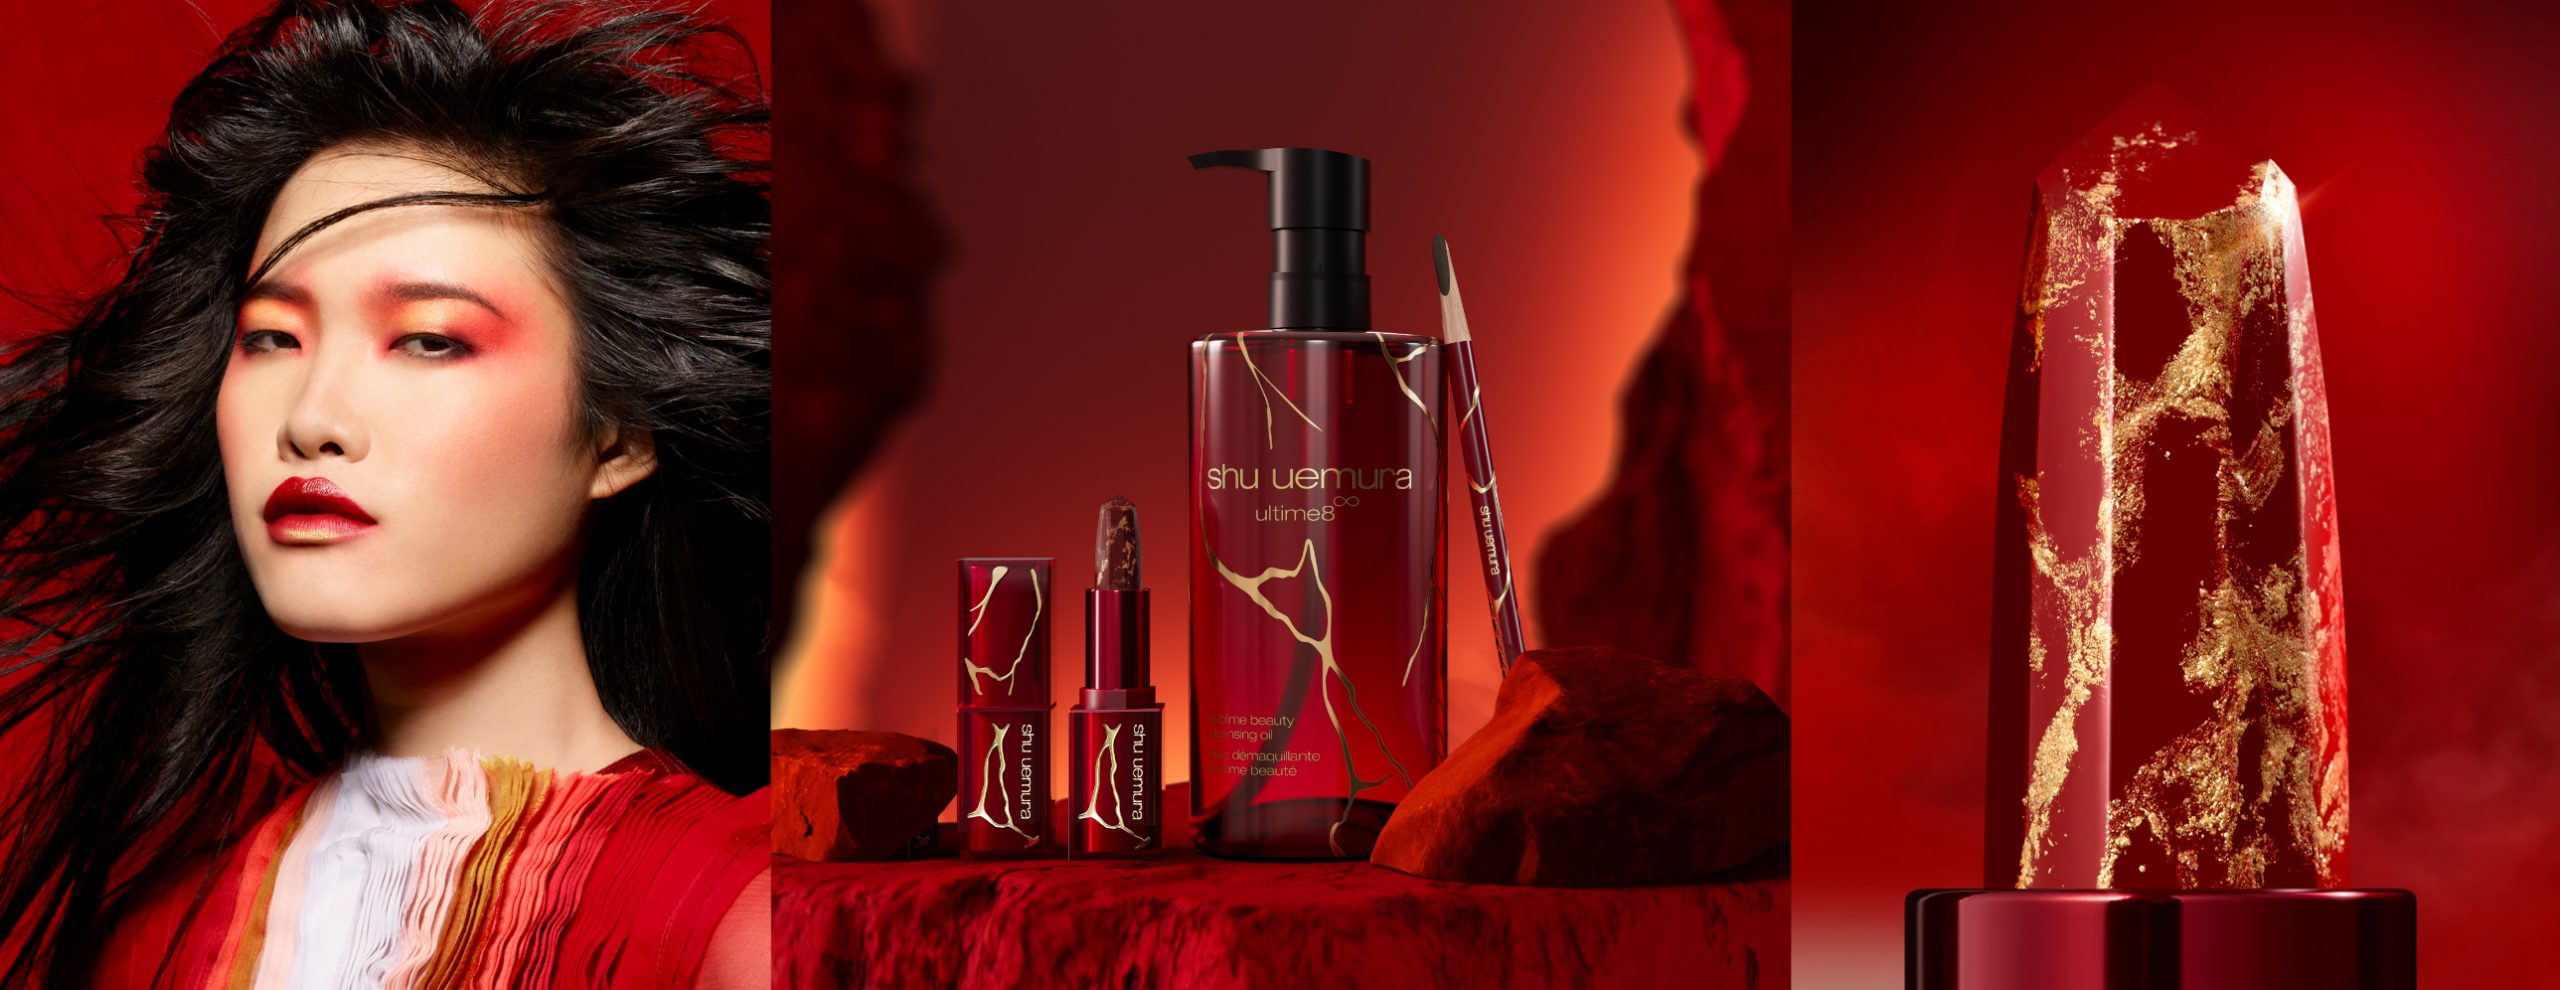 Shu Uemura Introduces An Exquisite Collection For The New Year